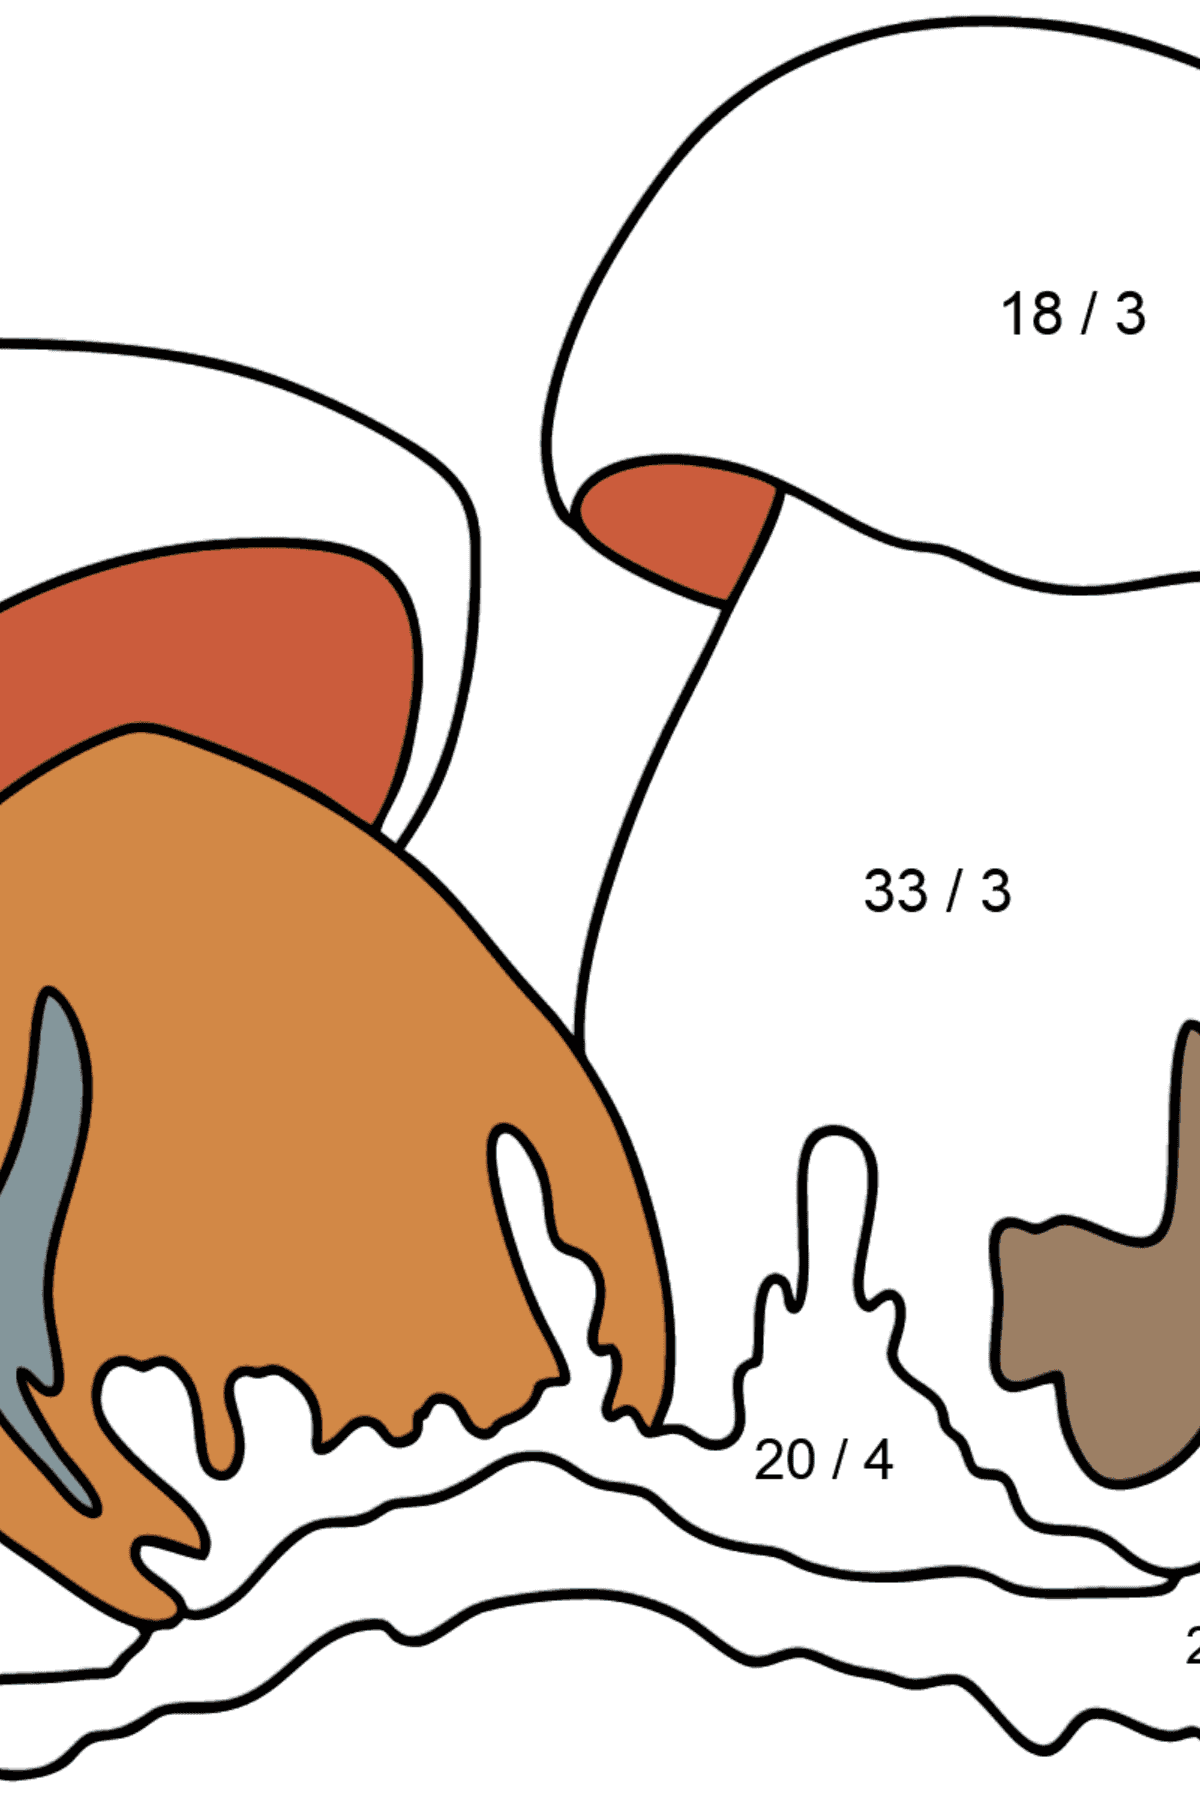 Lurid boletus coloring page - Math Coloring - Division for Kids